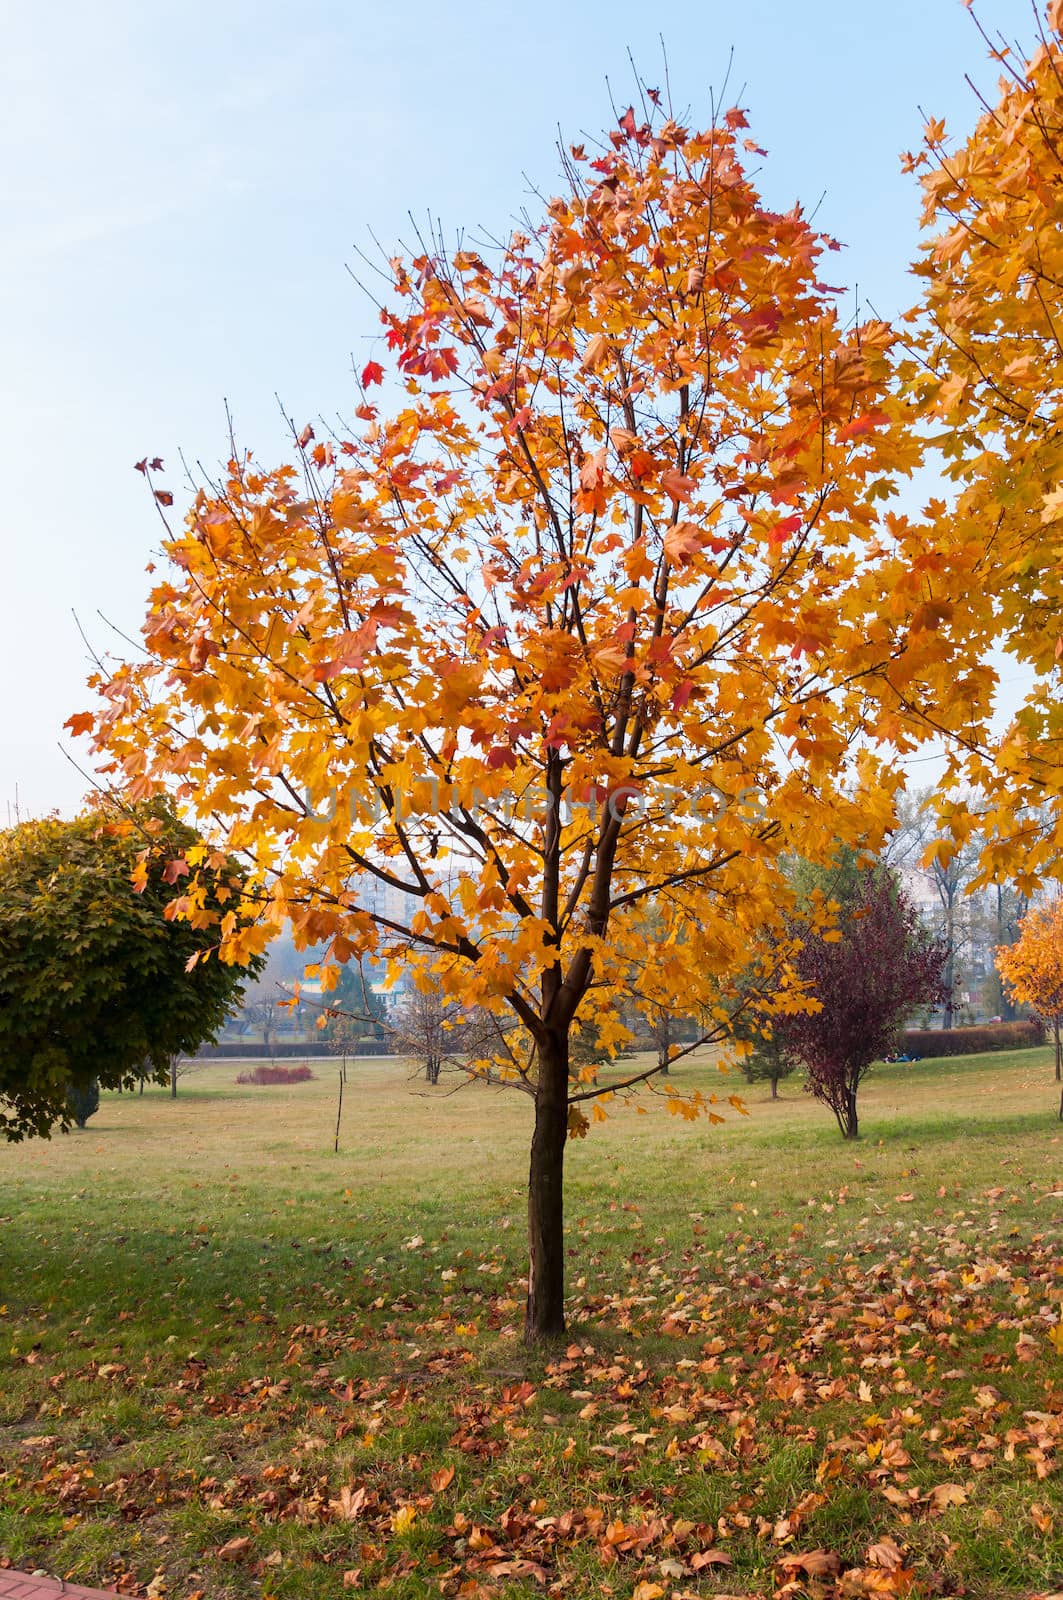 Autumn maple tree in a park. by mkos83